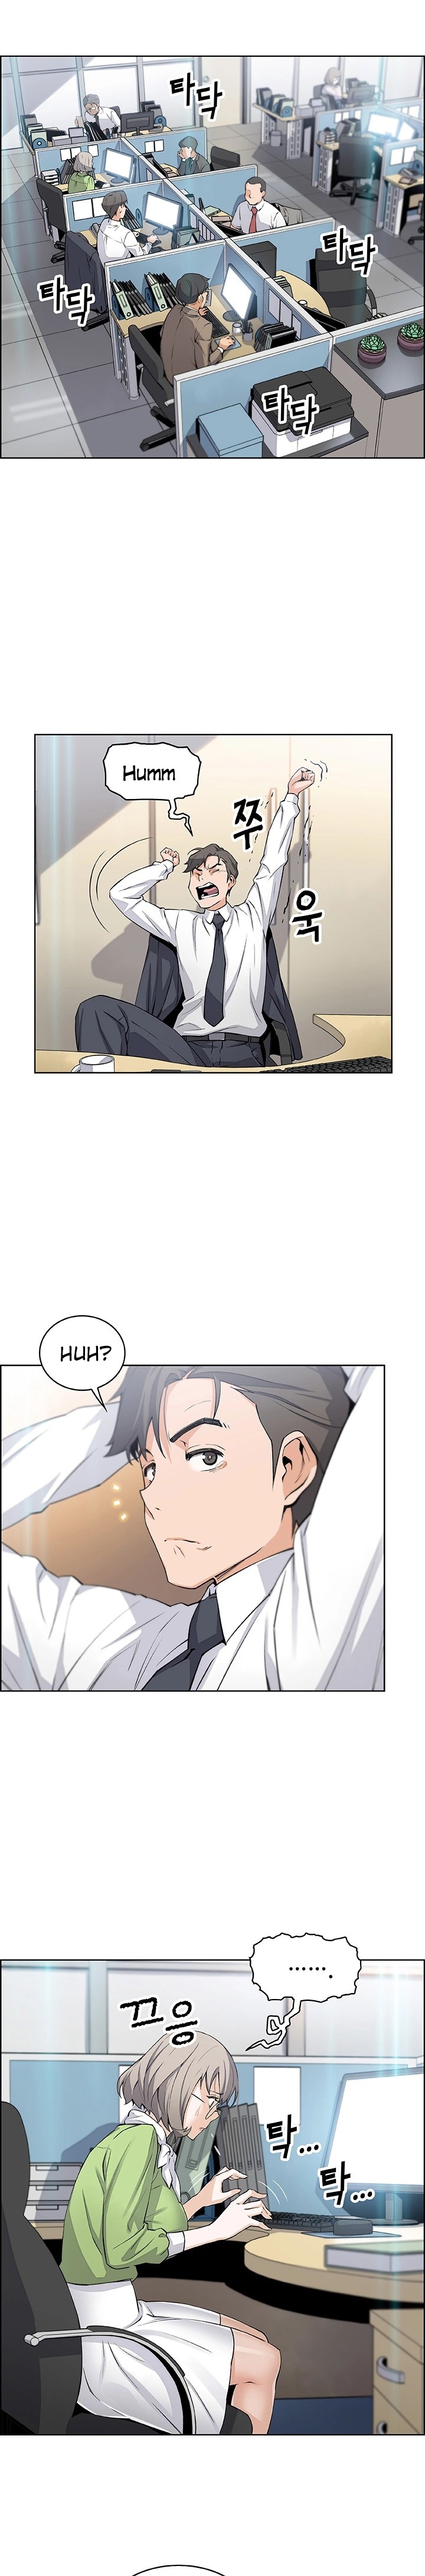 Housekeeper Manhwa - Chapter 15 Page 7